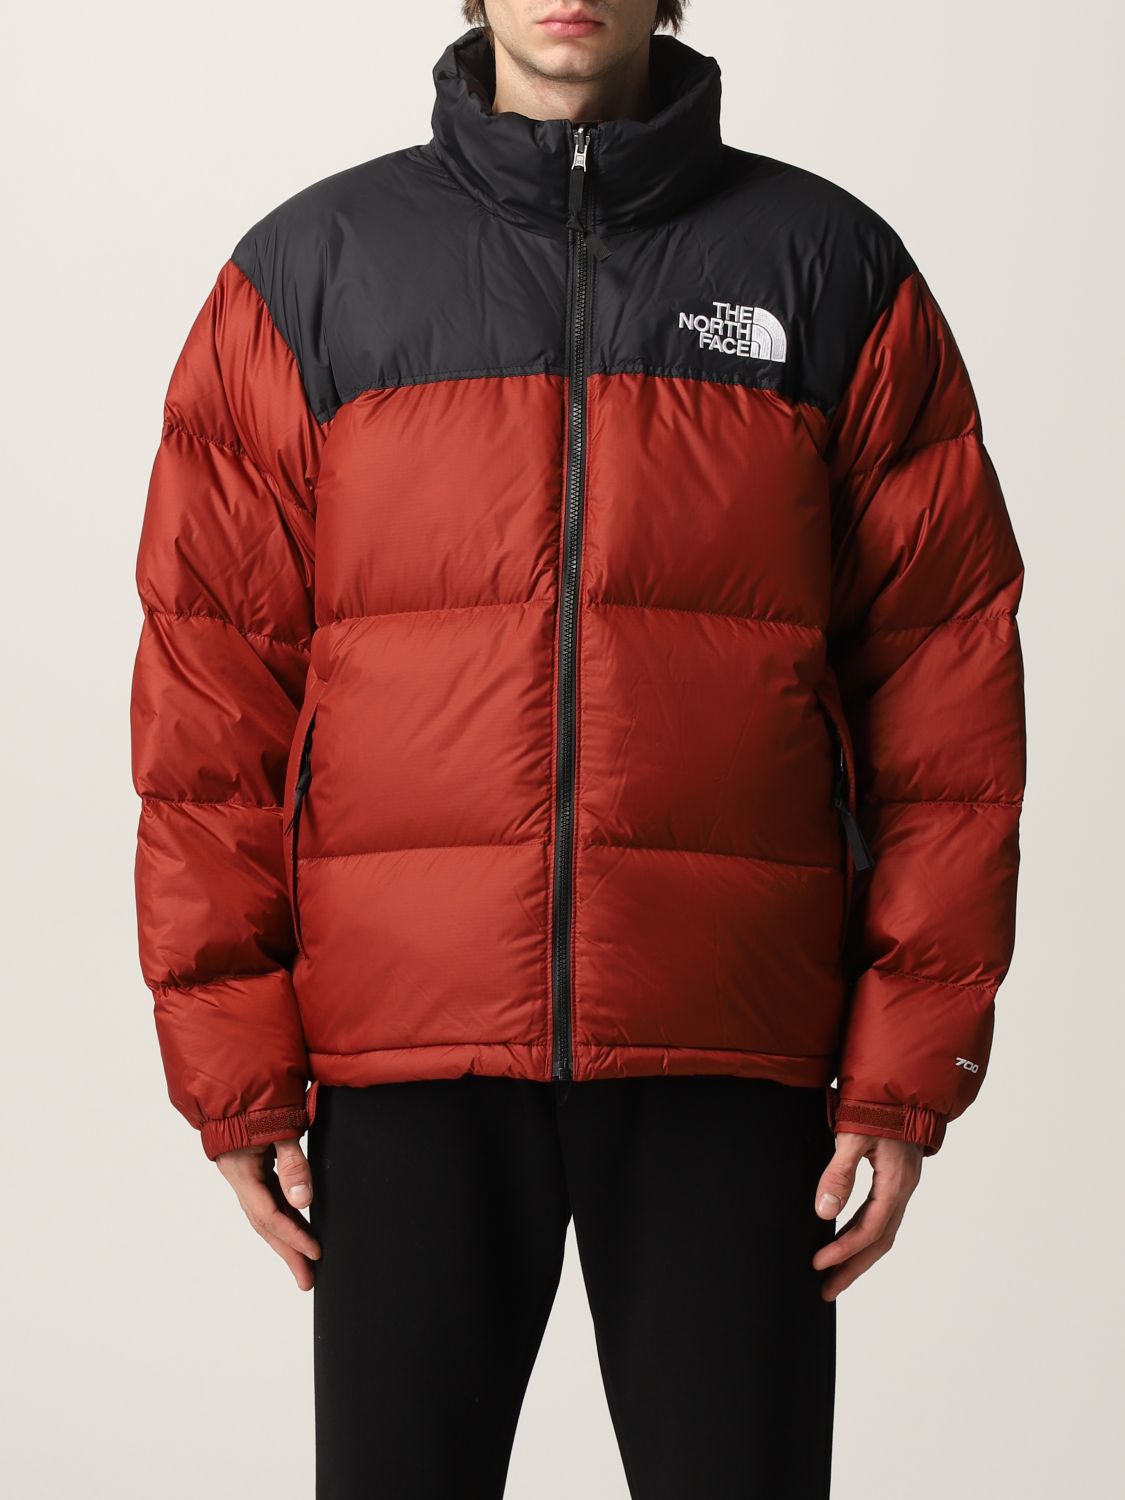 THE NORTH FACE: jacket for man - Burgundy | The North Face jacket ...